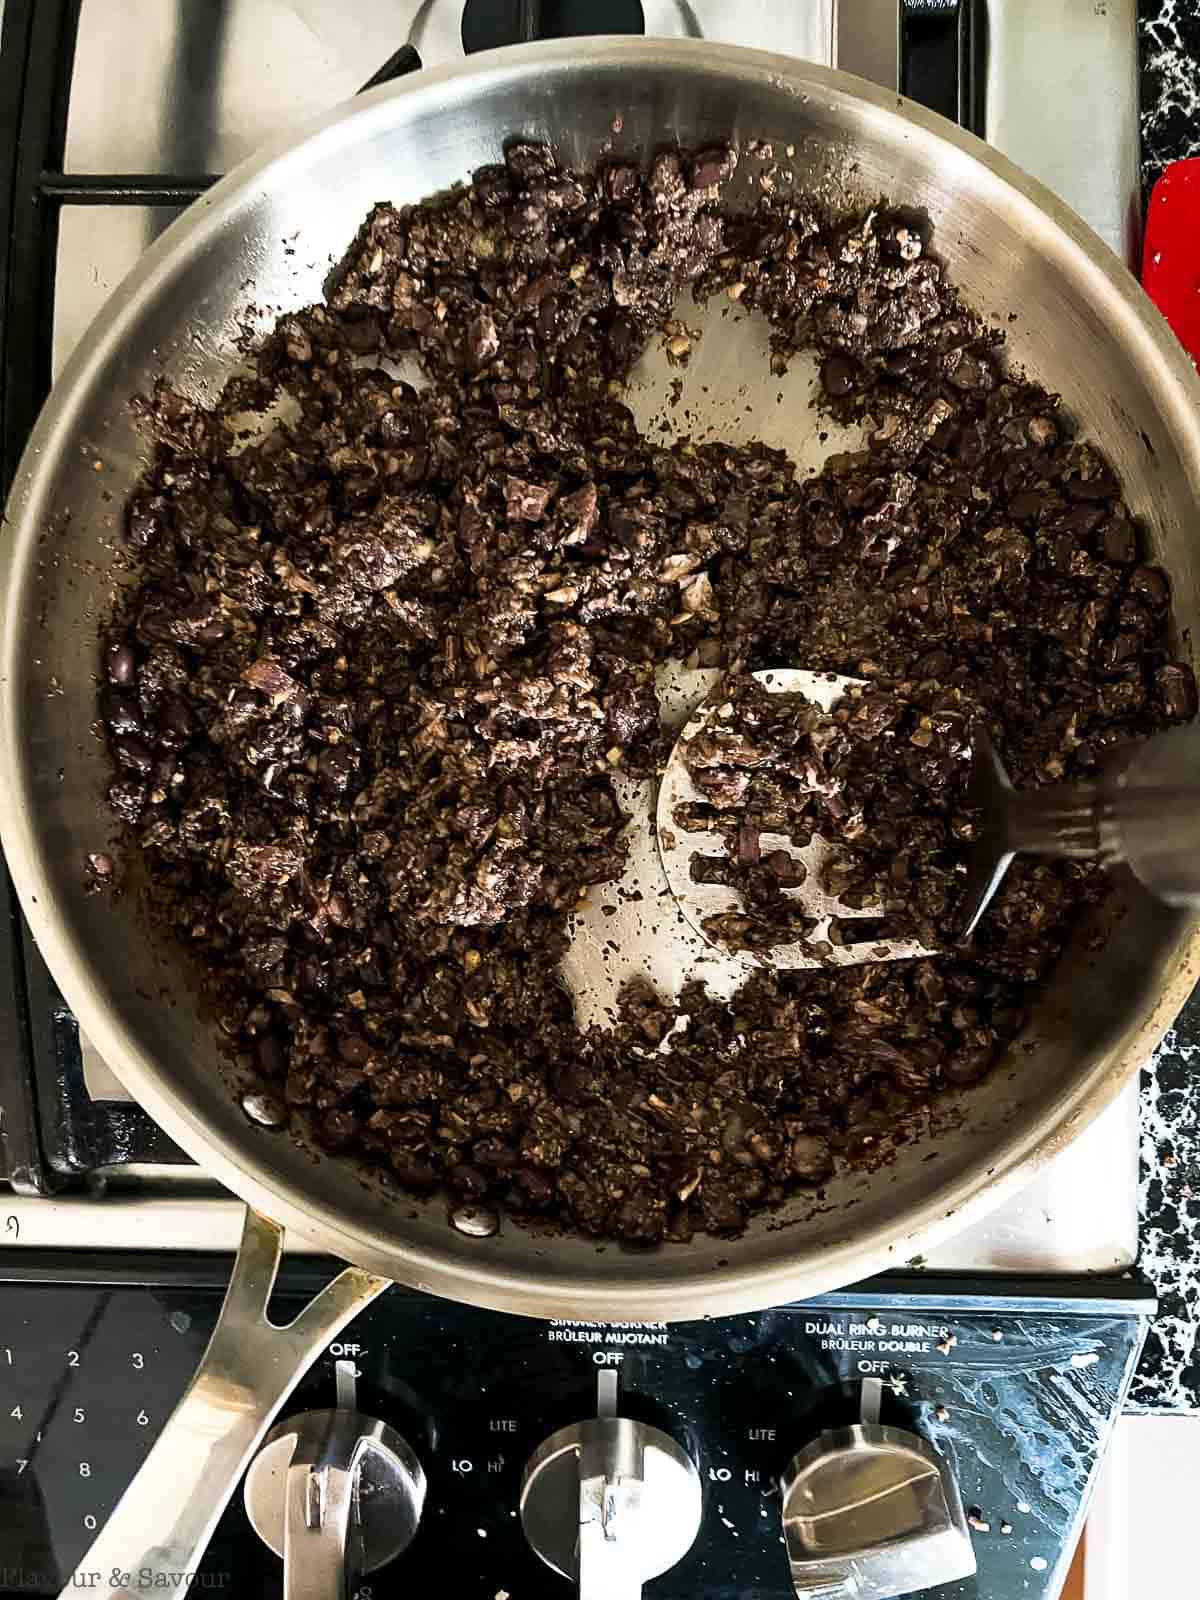 Mashing black beans with mushrooms in a skillet.